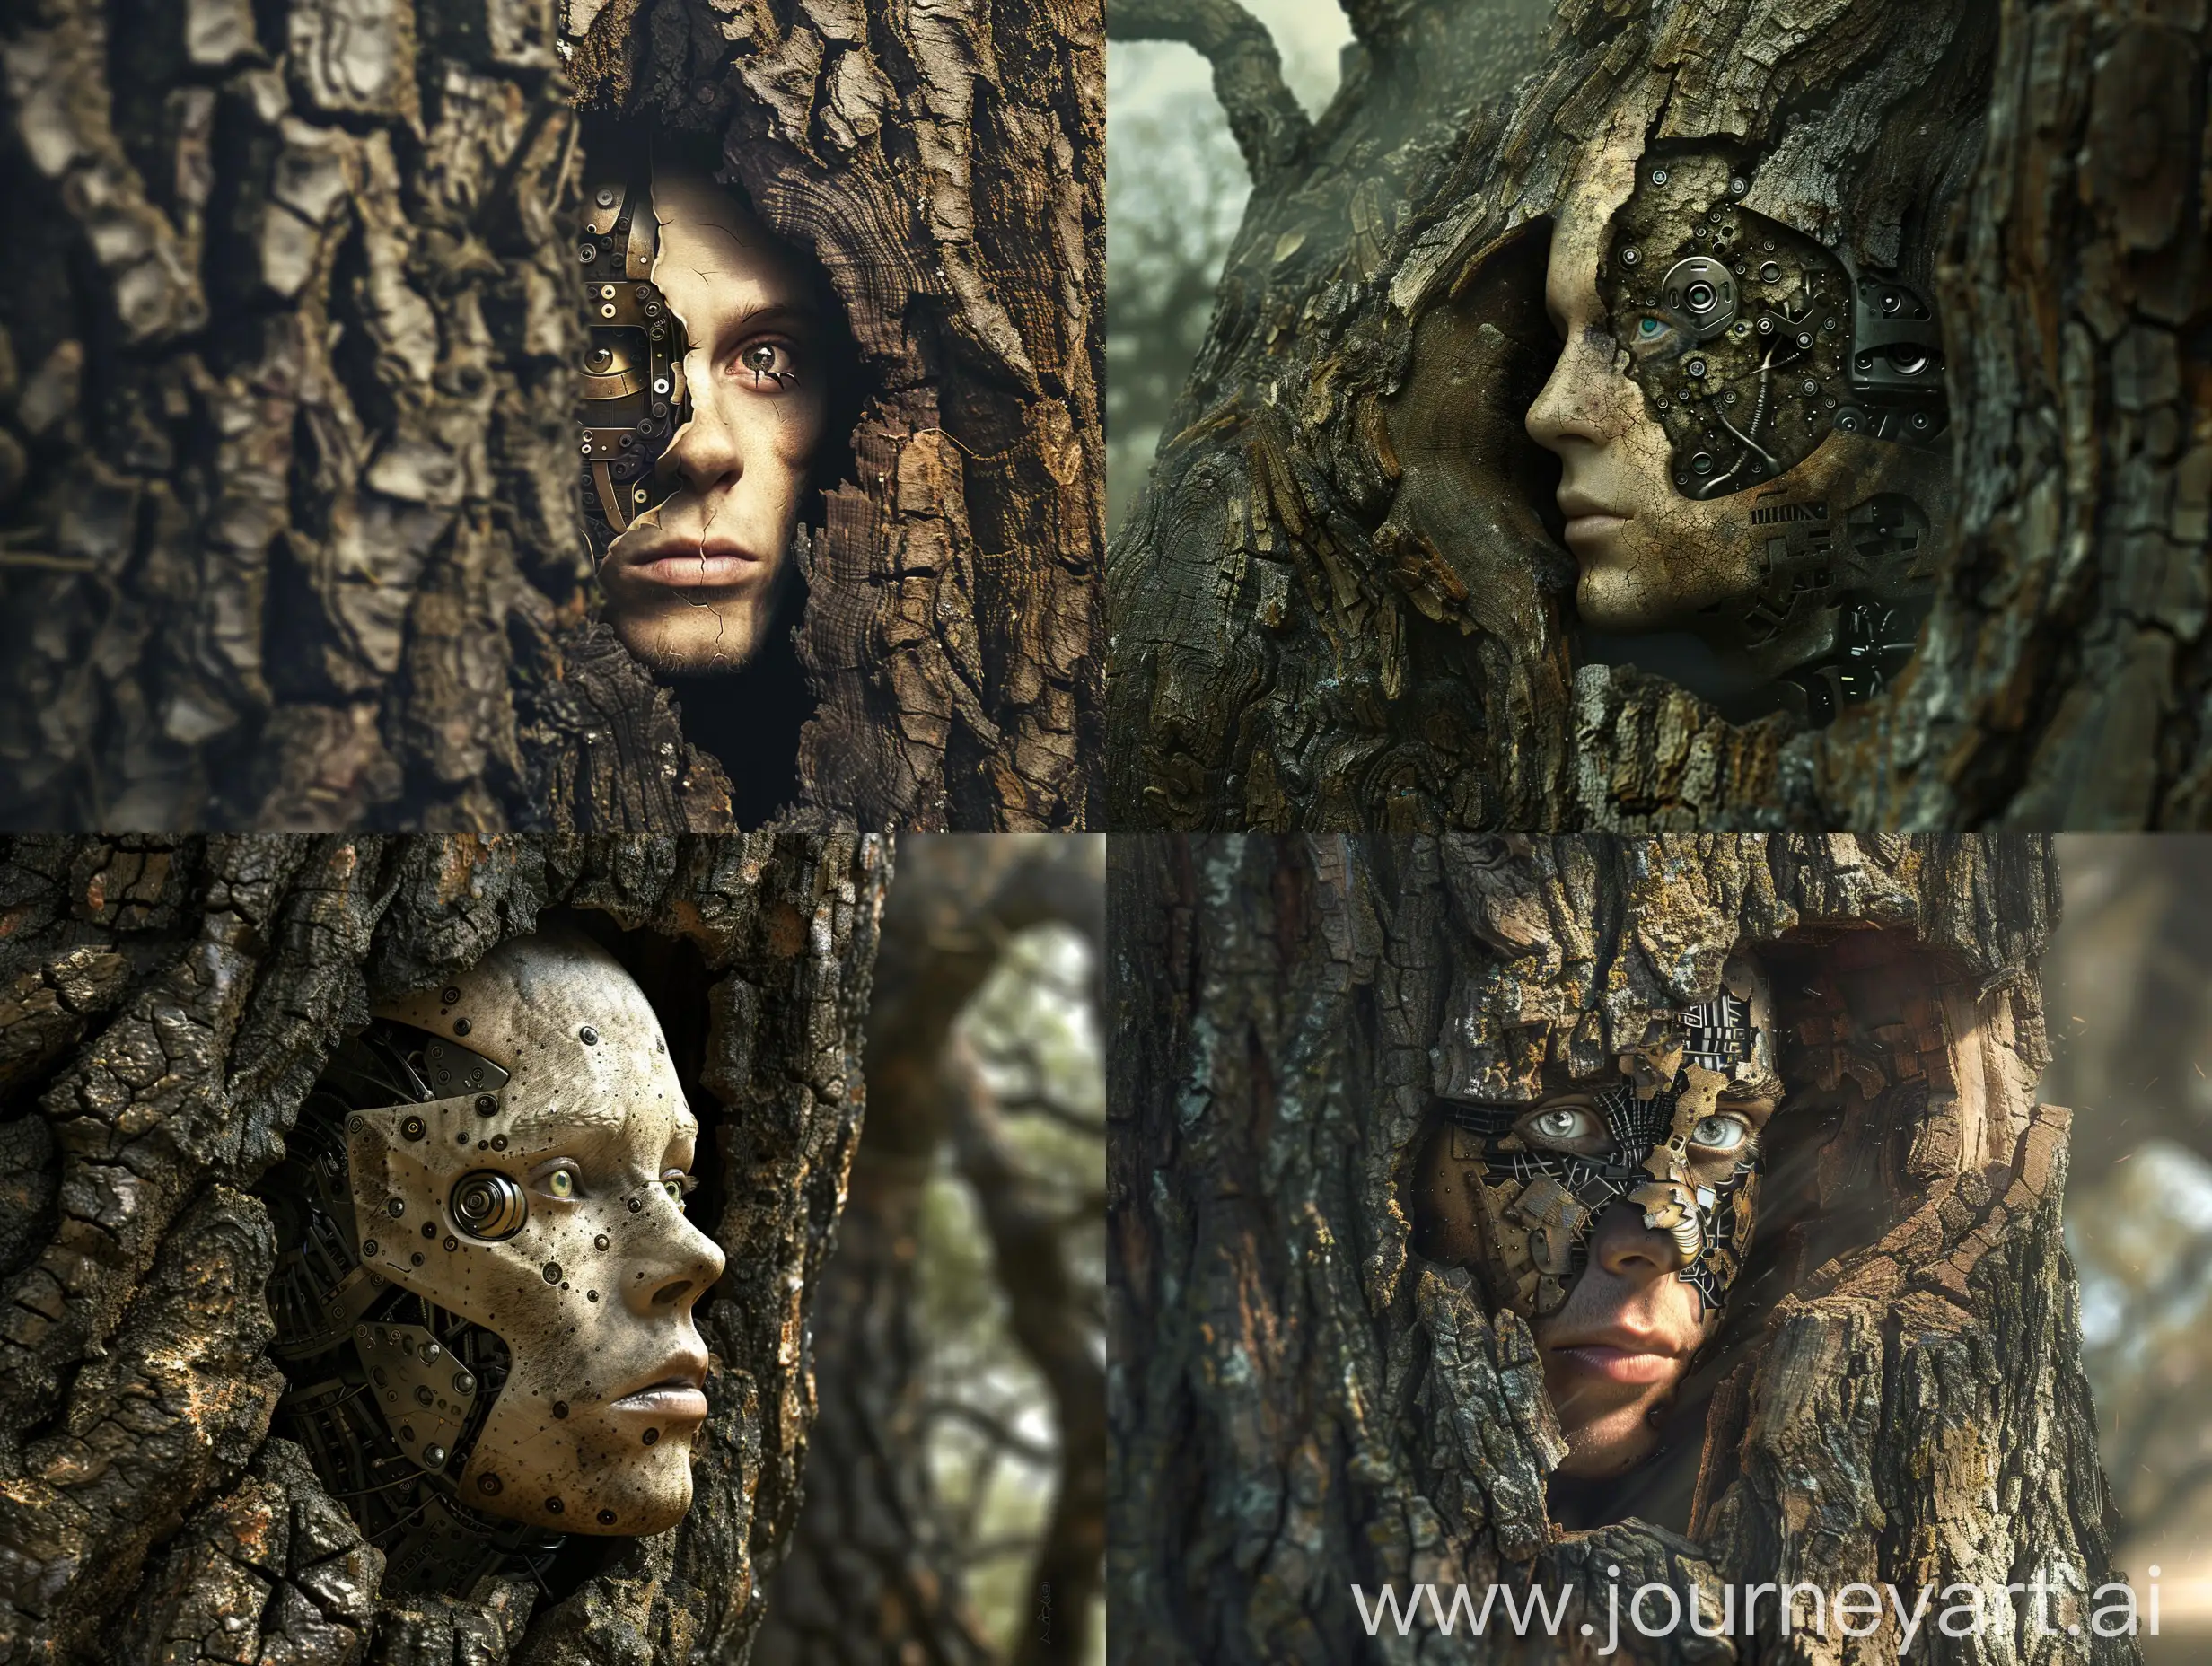 Surrealist-Man-with-Partial-Robot-Face-Emerging-from-Thick-Oak